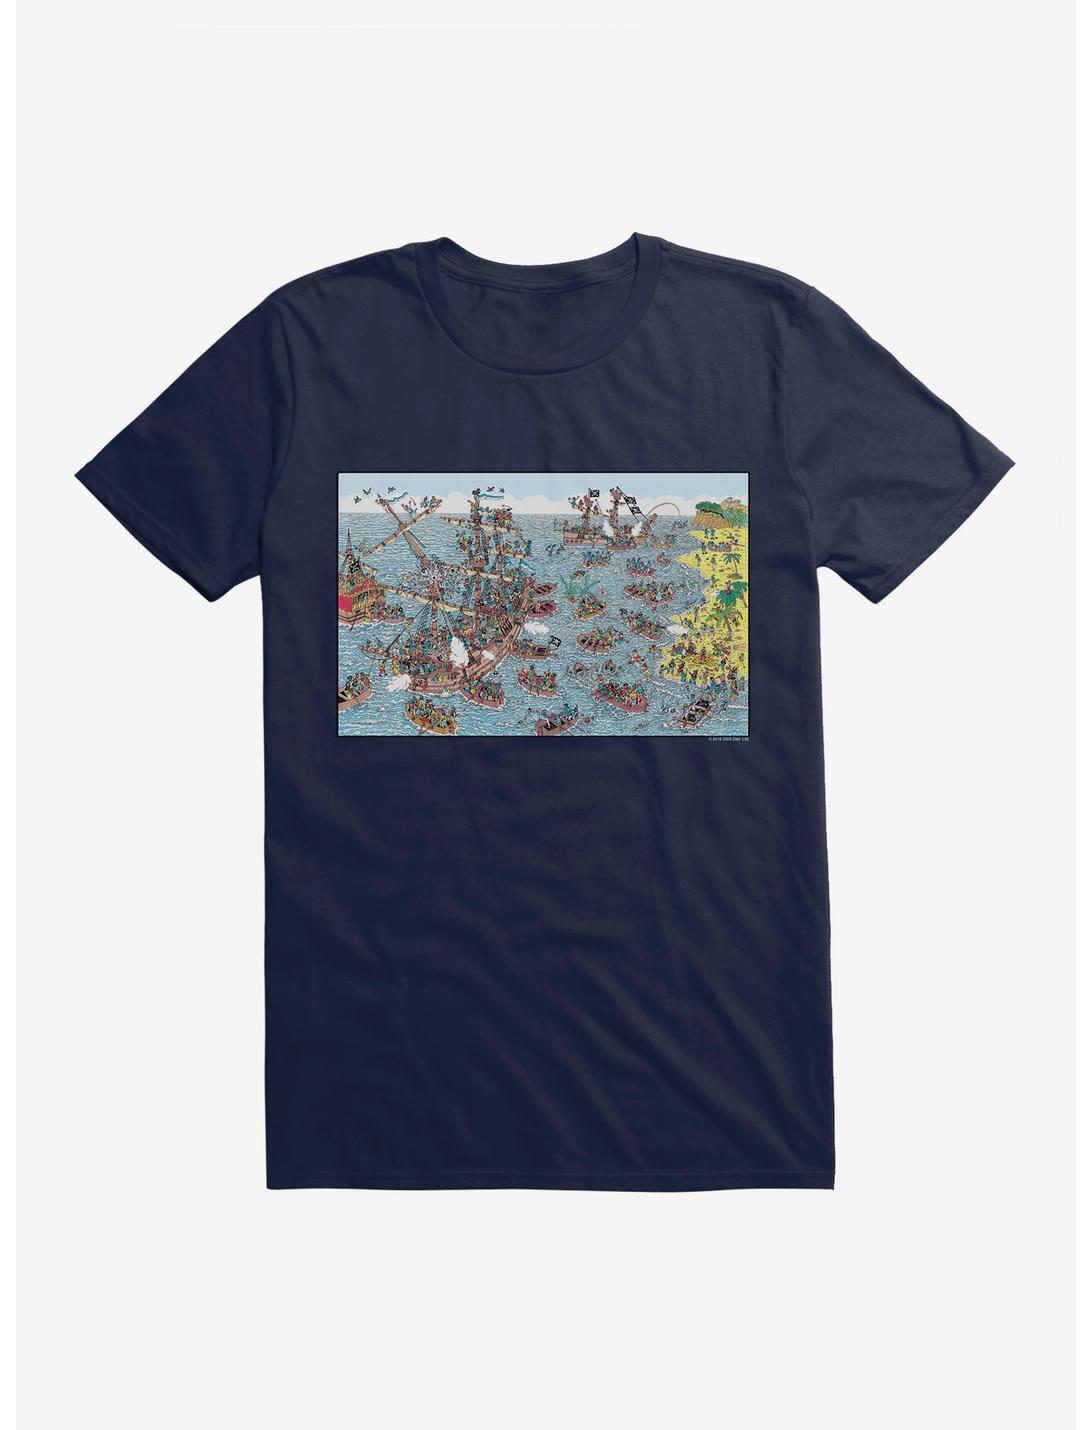 Where's Waldo? Search The Pirate Ships T-Shirt, MIDNIGHT NAVY, hi-res